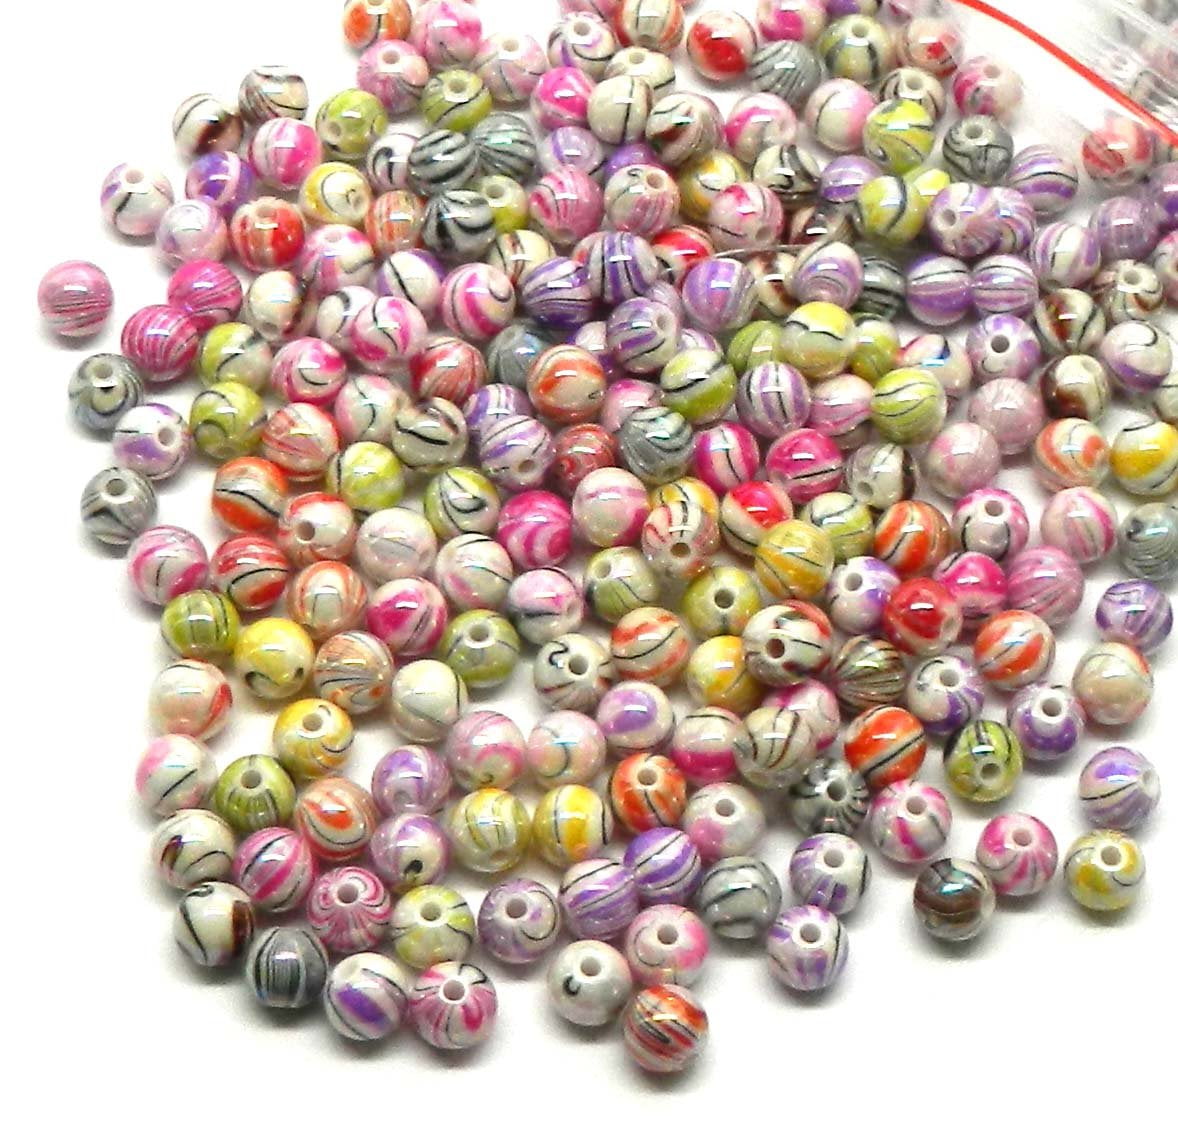 200pc Opaque Acrylic Donut Beads Large Hole Smooth Mini Loose Spacer Beads 8x6mm 